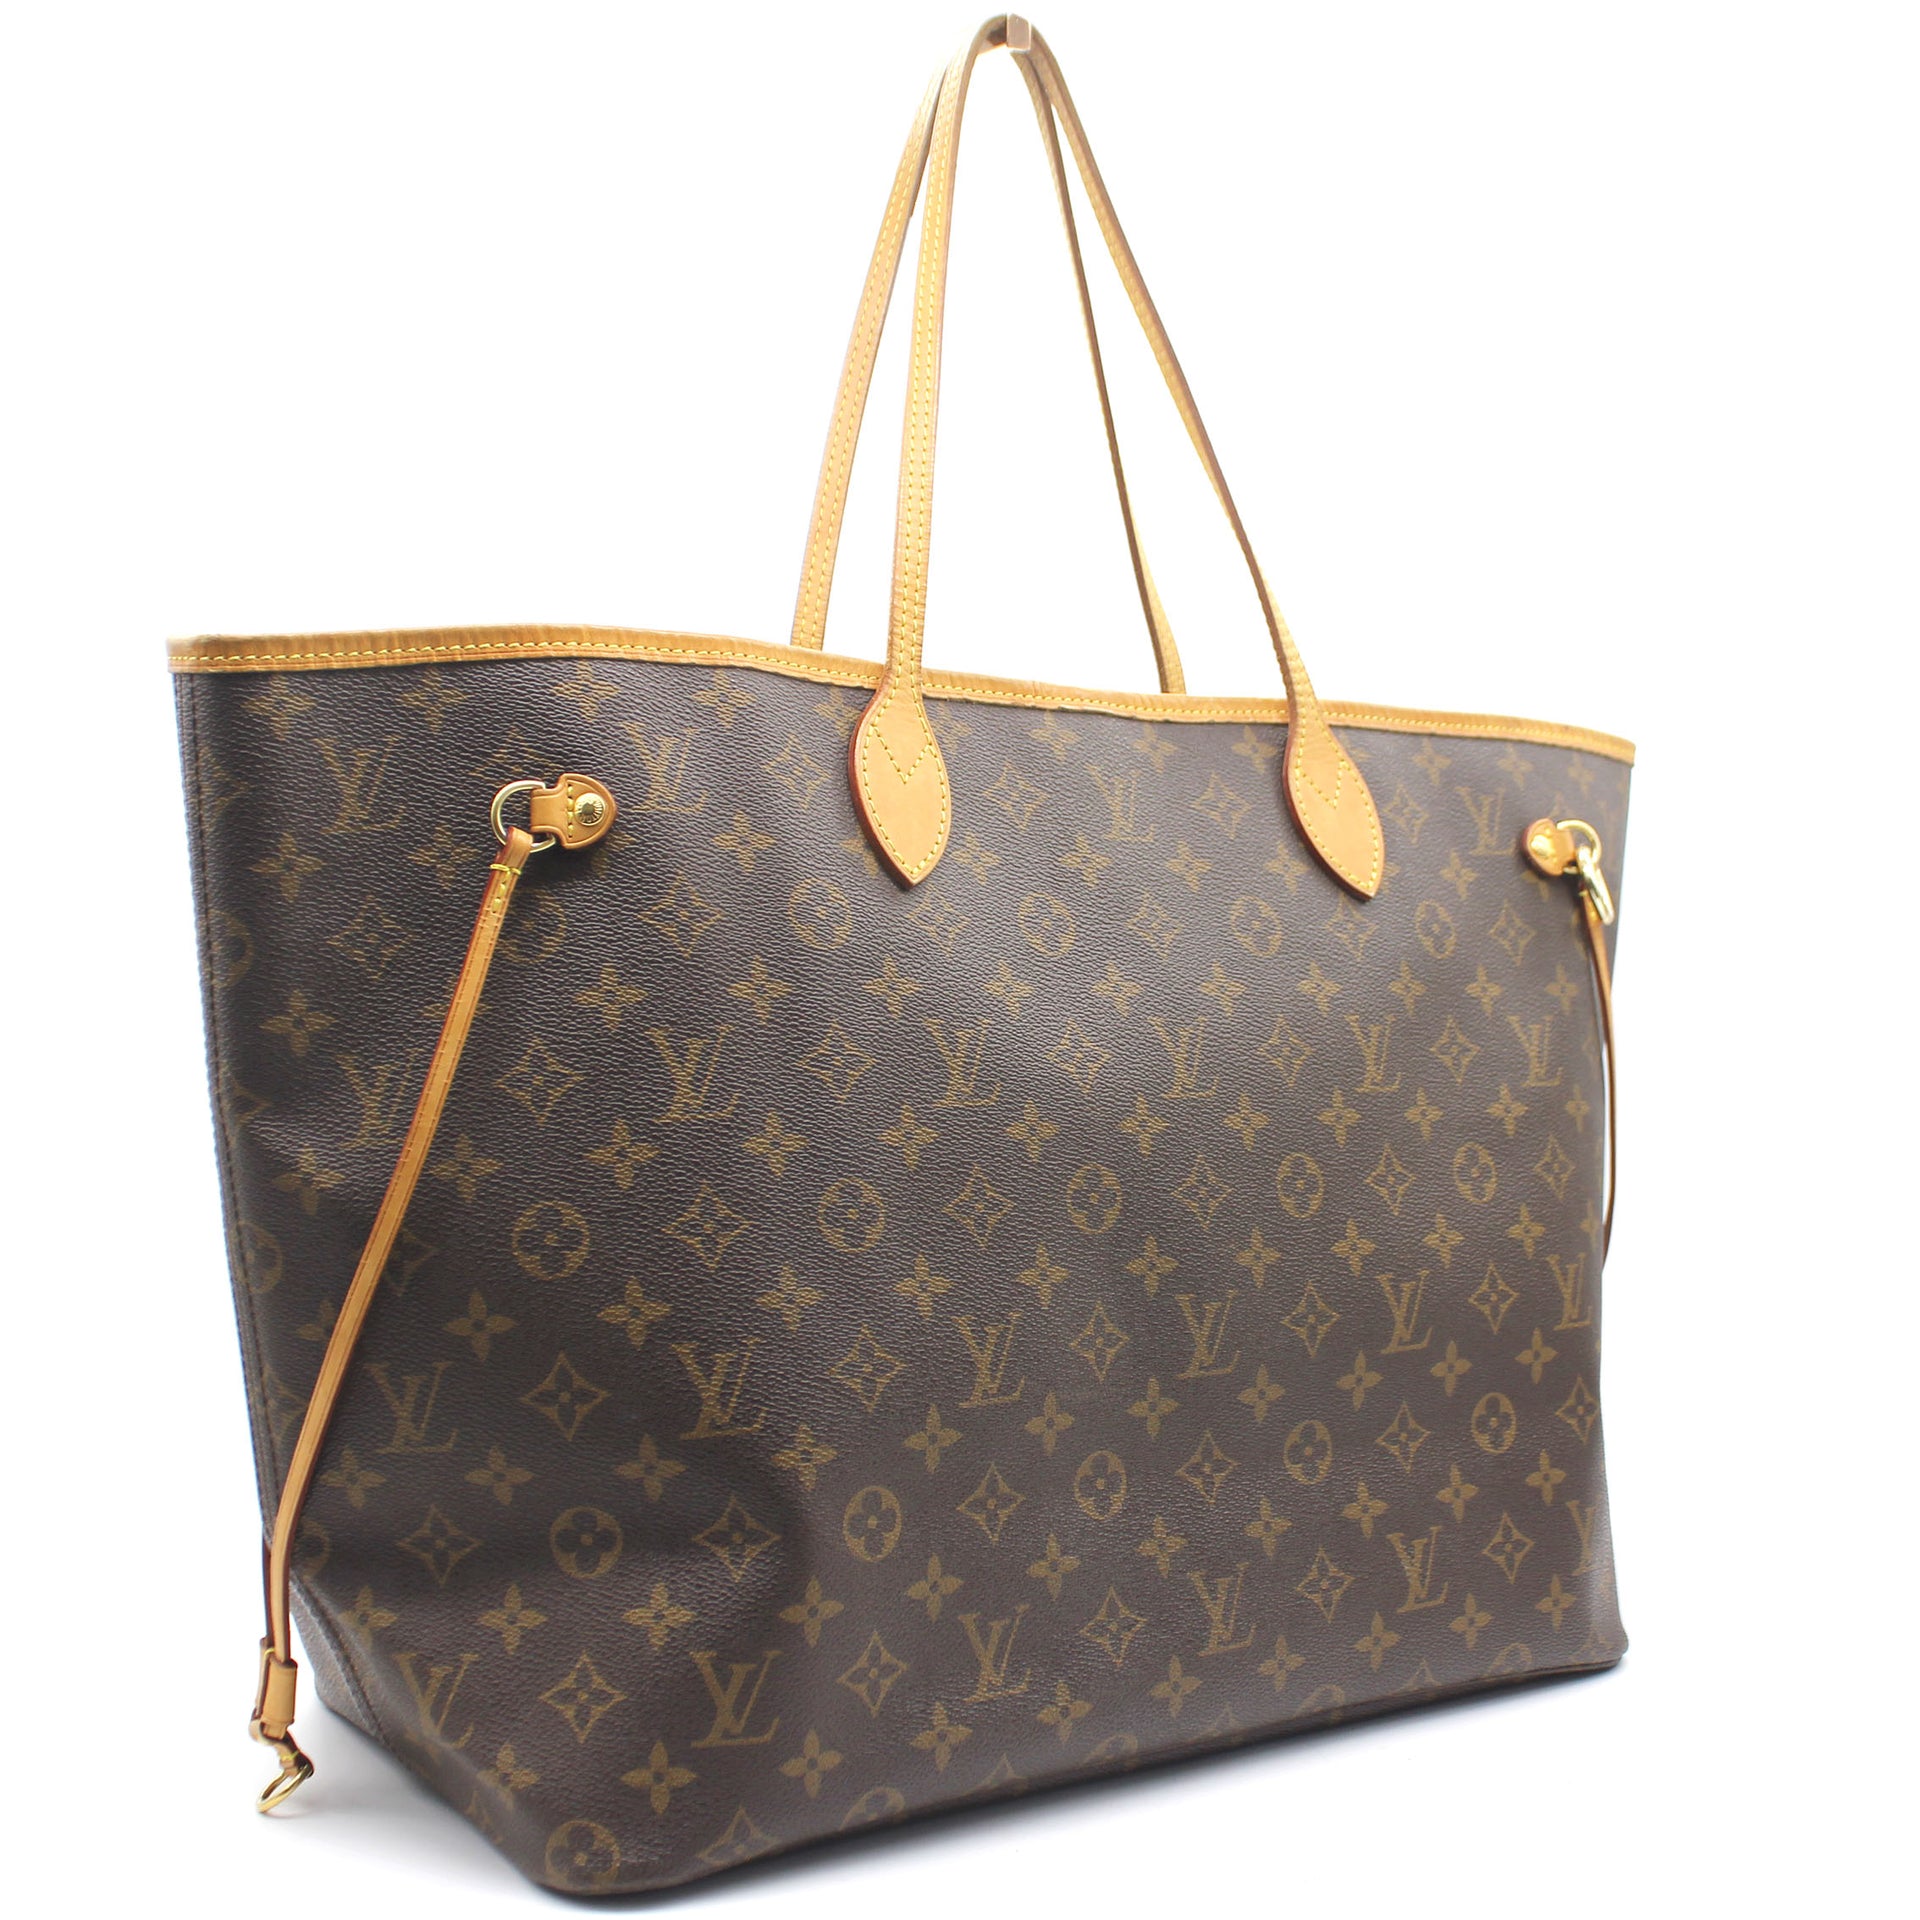 Louis Vuitton Neverfull Shopping Bag in Monogram Canvas and Natural